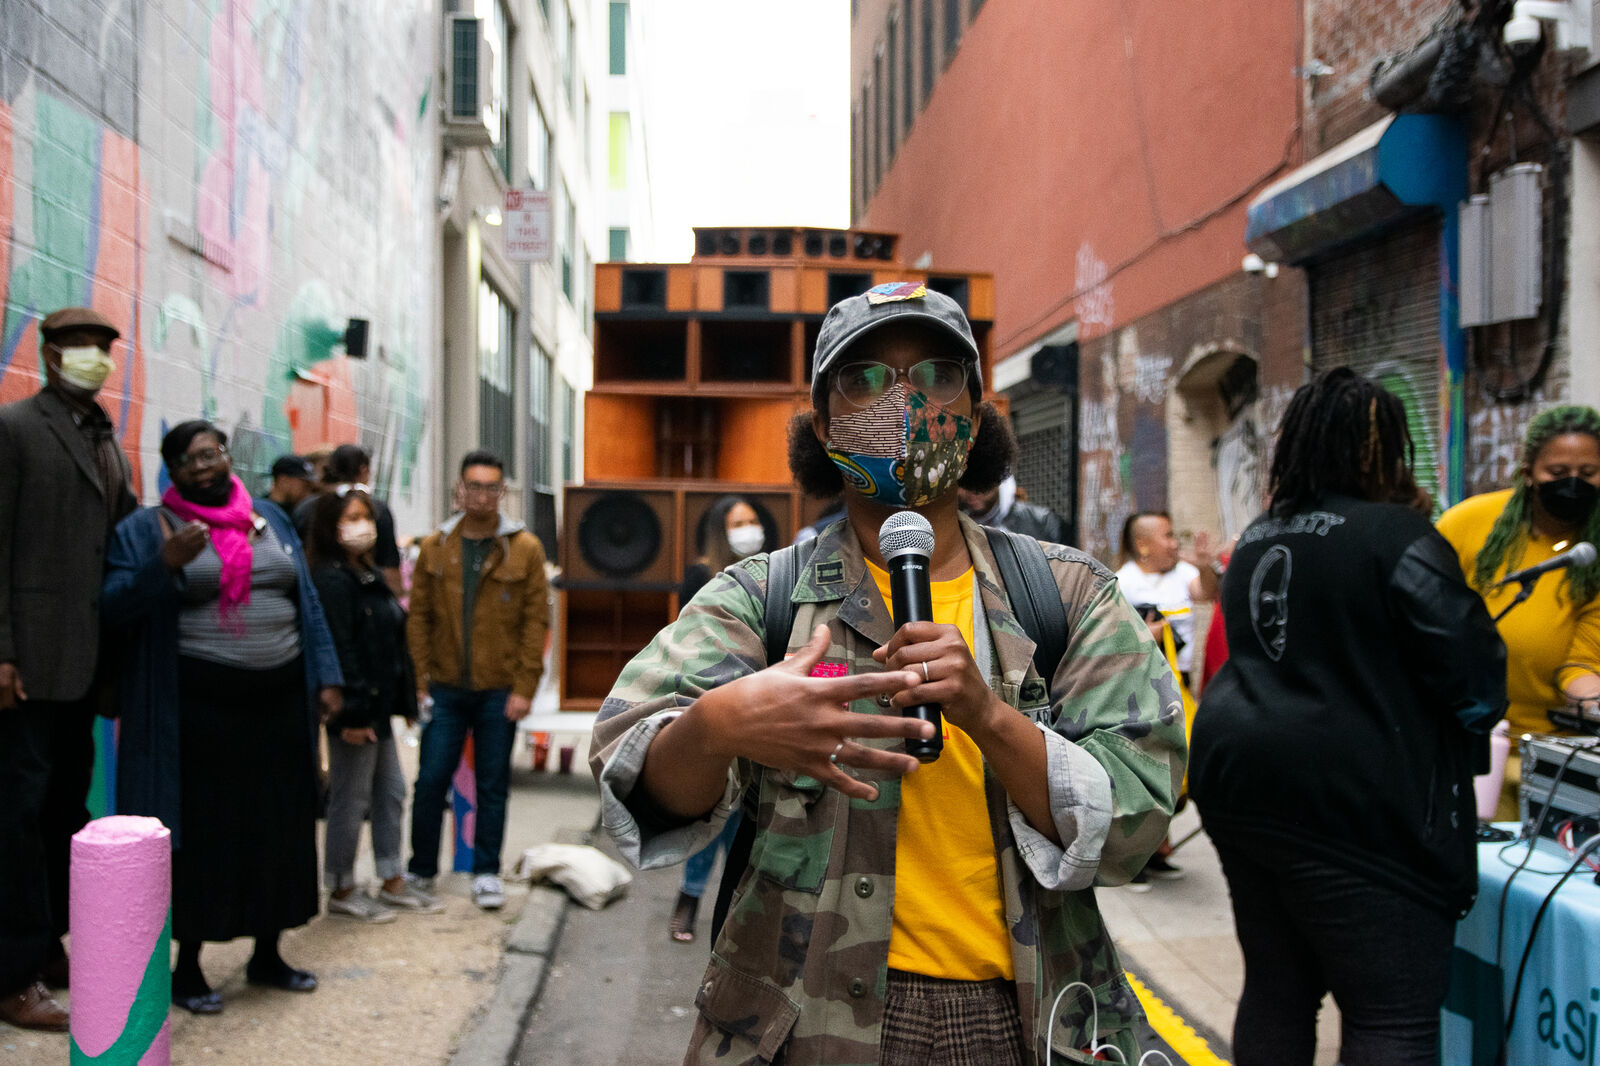 woman in mask on microphone speaks in front of a crowd and wall of speaker cabinets in the street